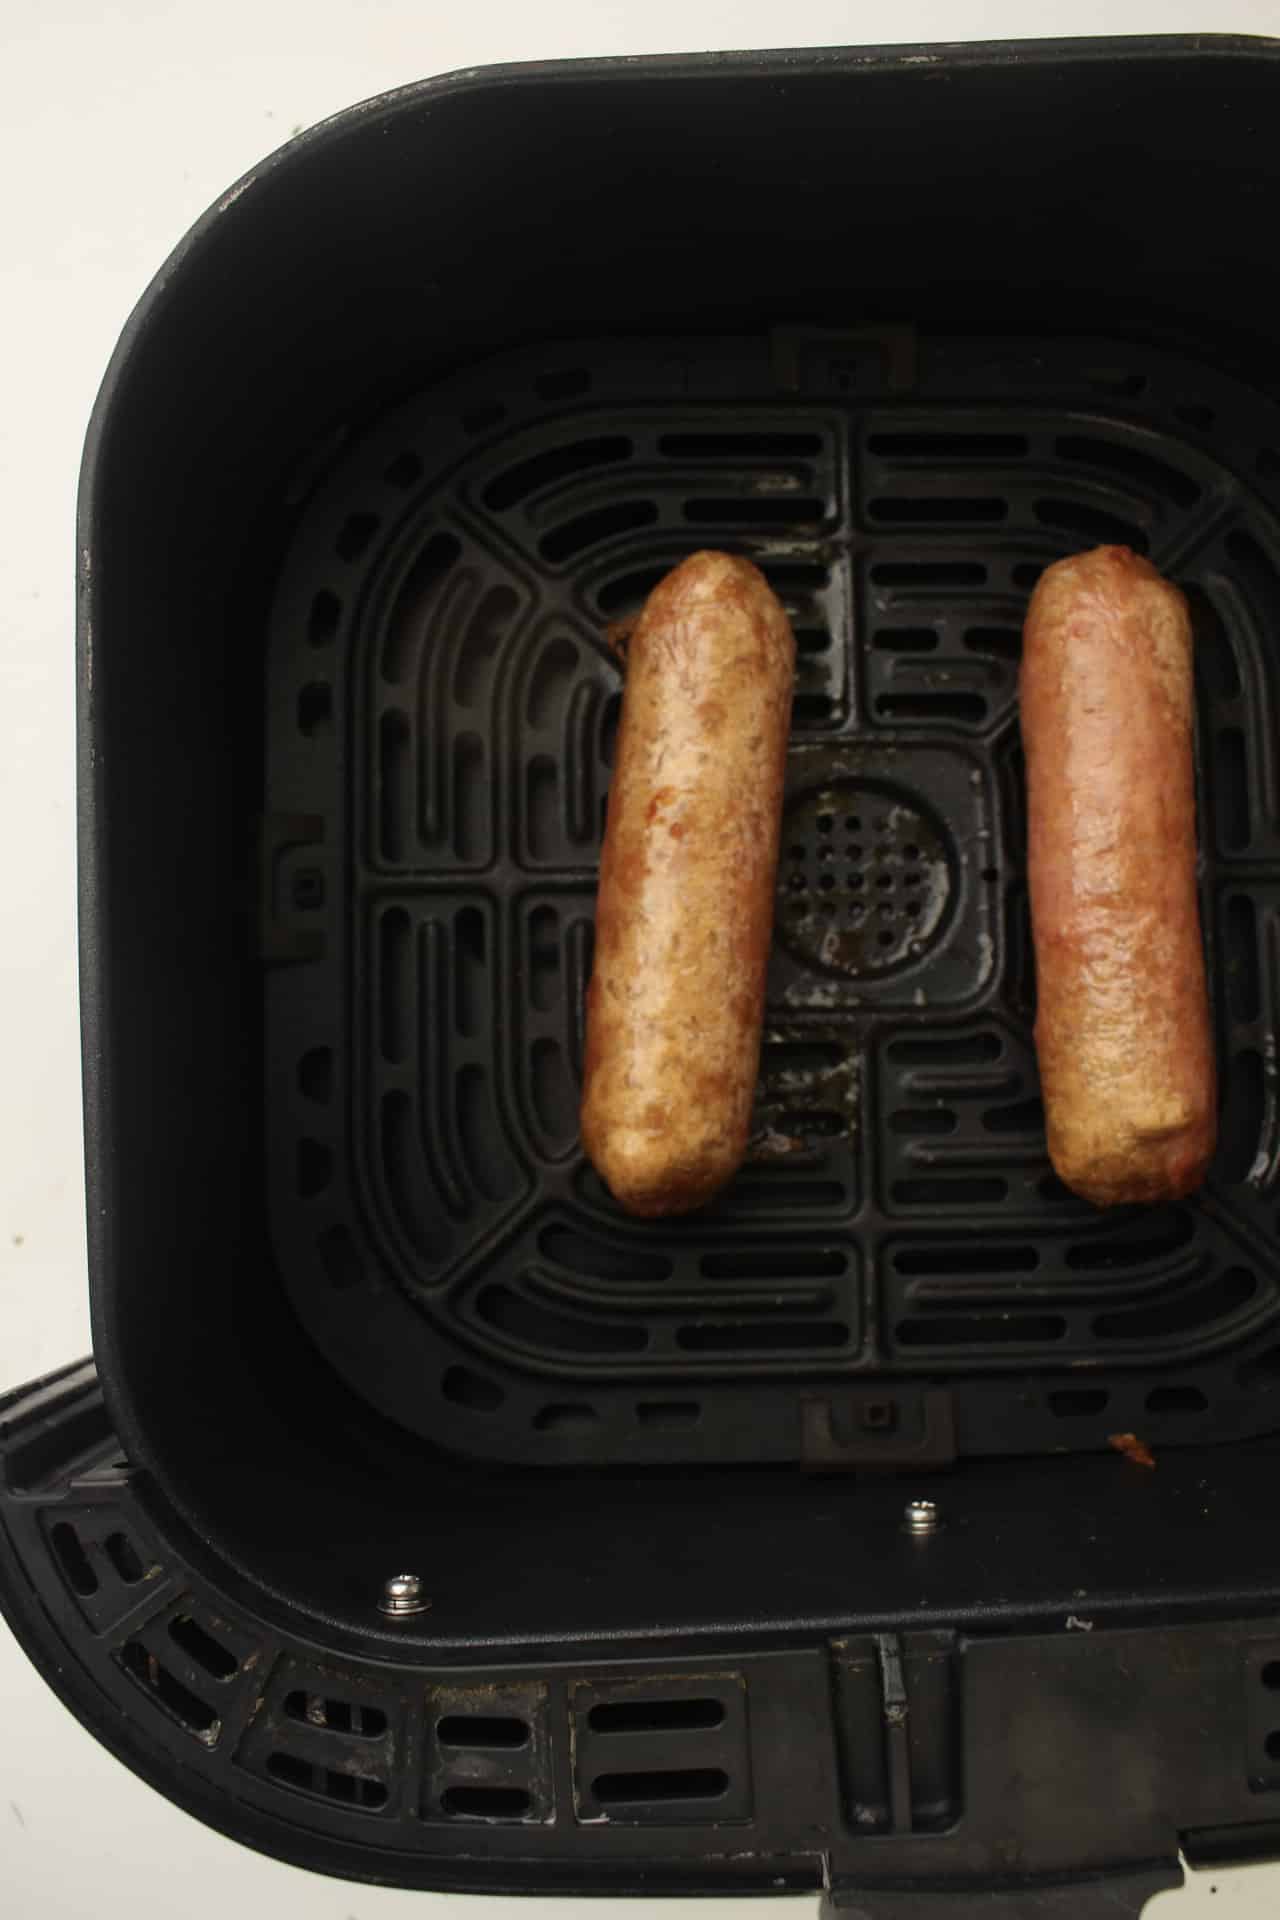 Air fryer Beyond Sausage cooked in the air fryer